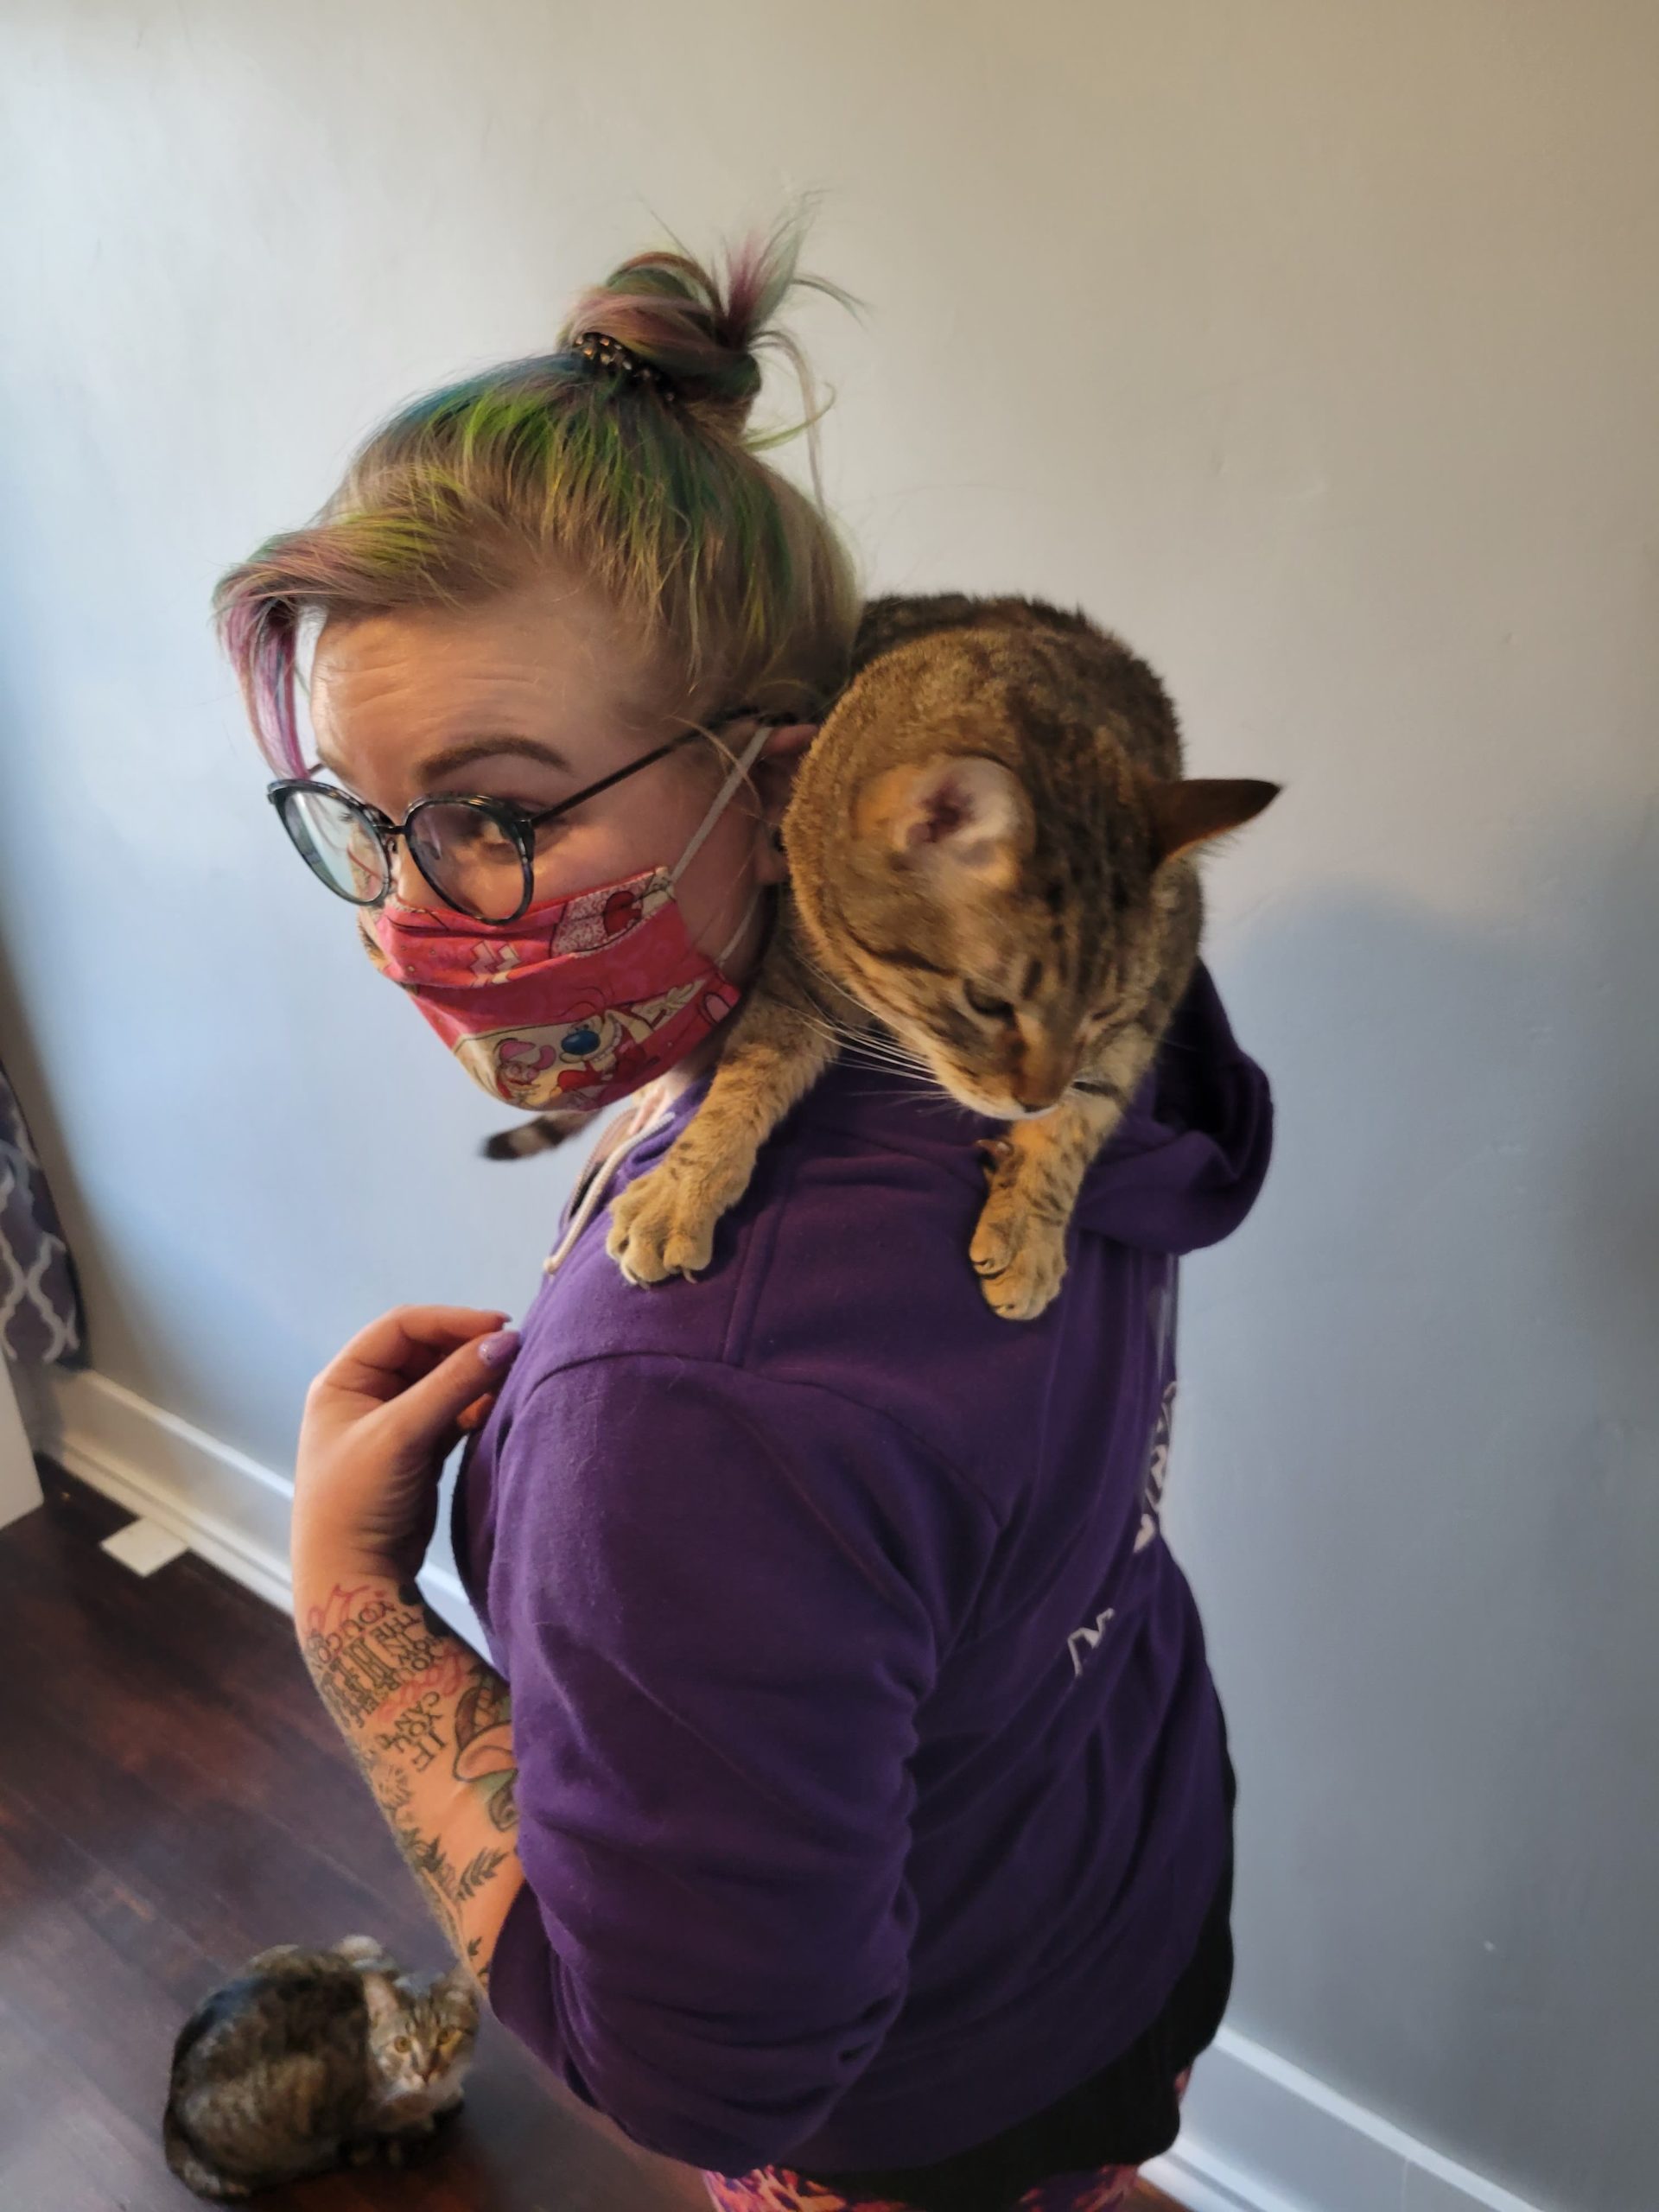 A cat sits on a woman's shoulders.